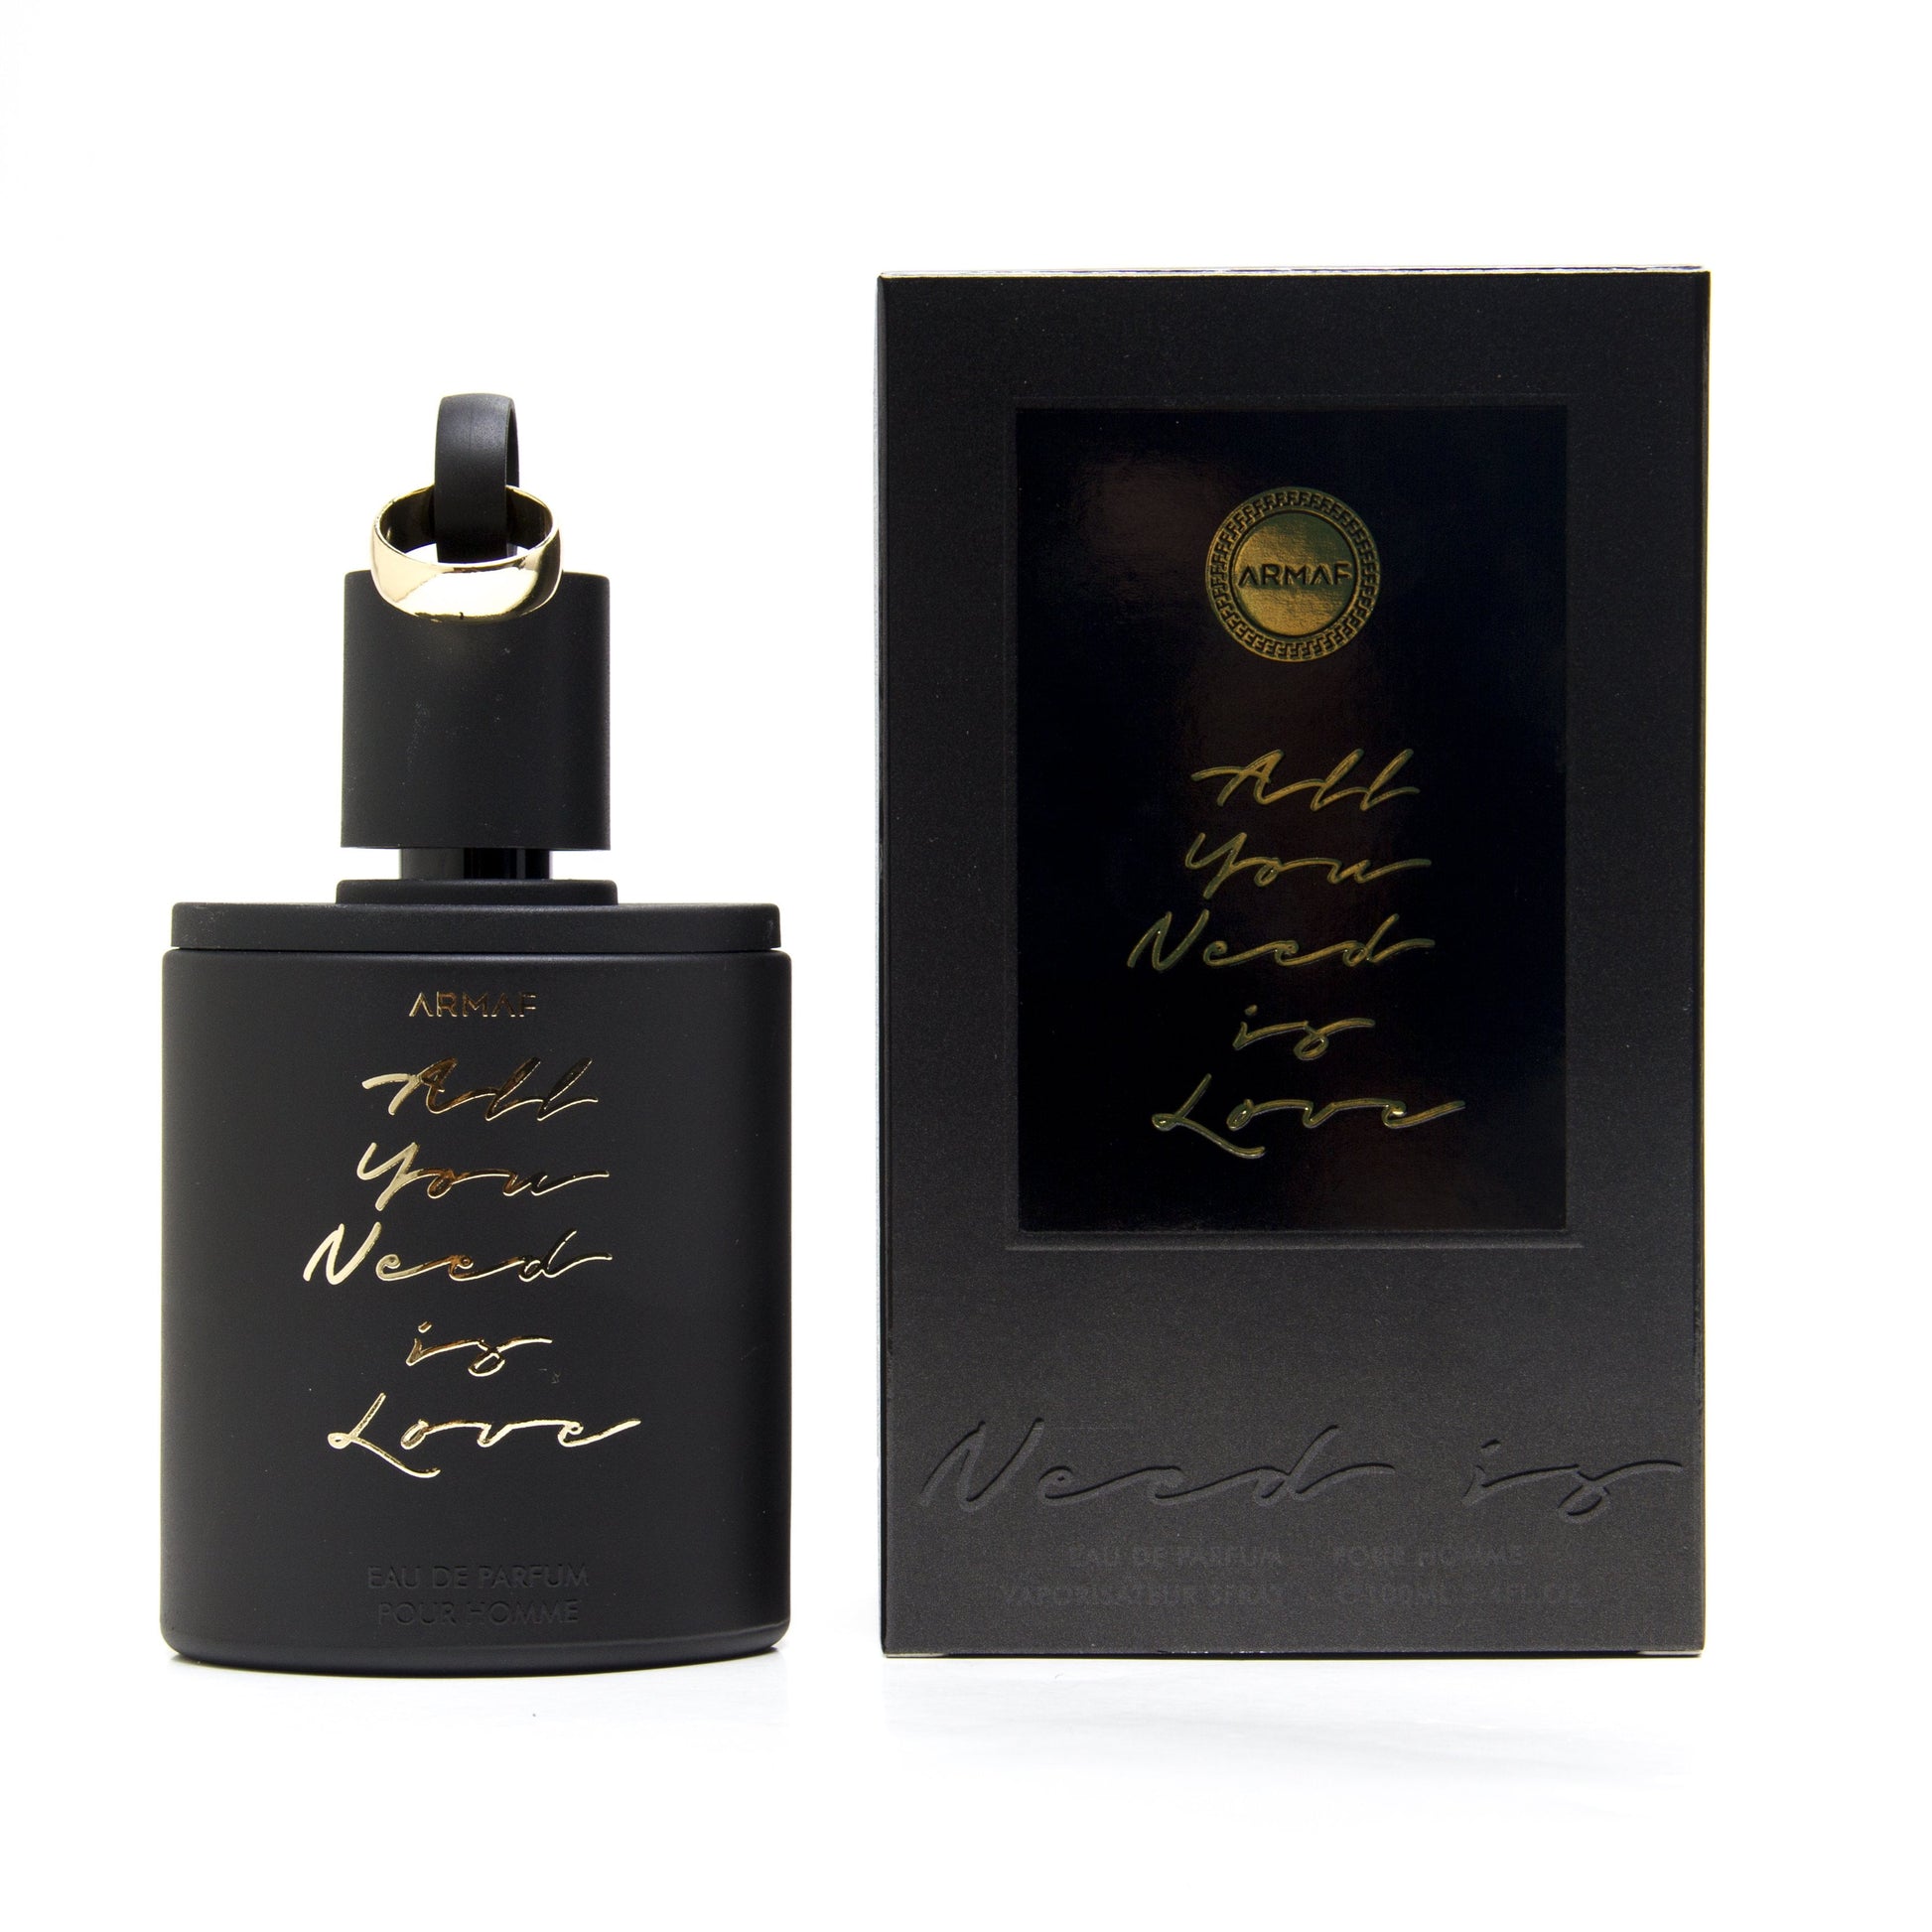 All You Need Is Love Eau de Parfum Spray for Men, Product image 1